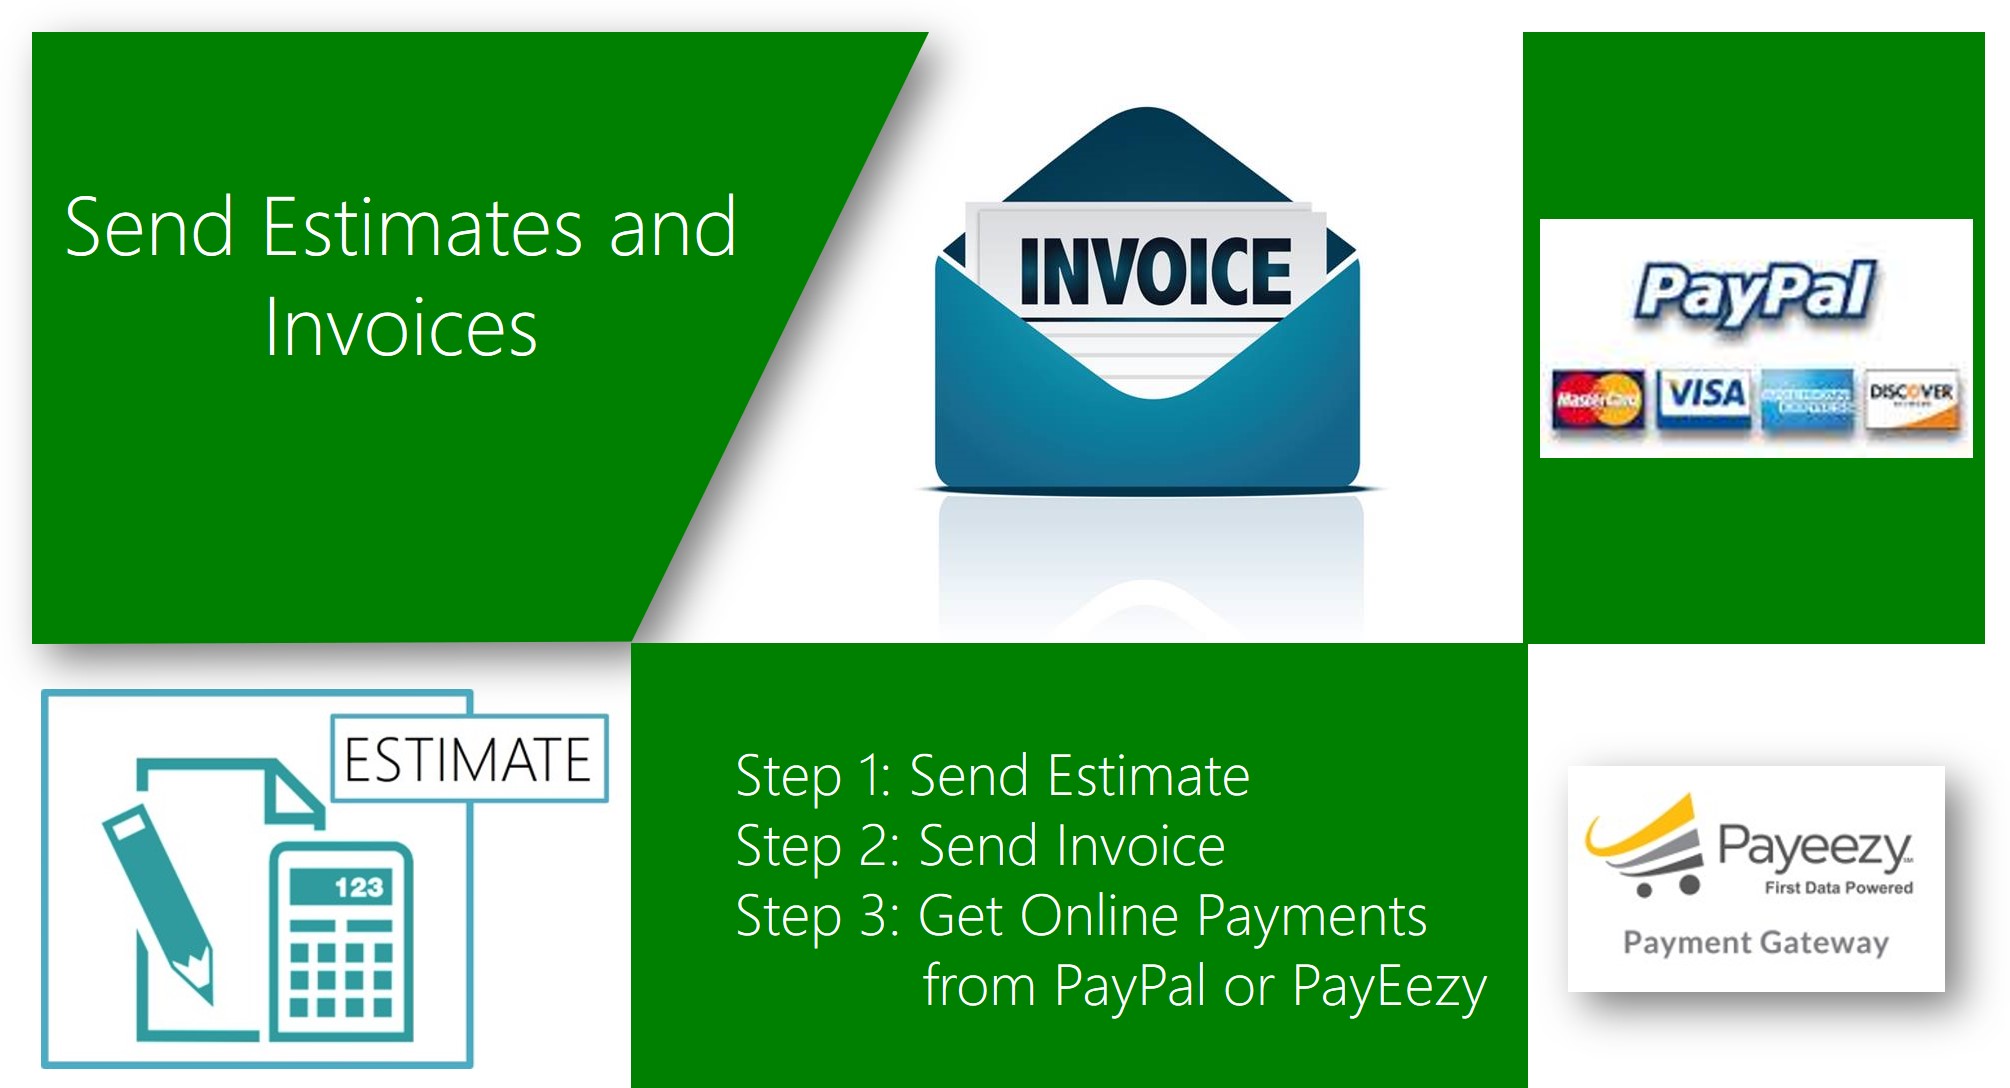 Honor Services Office Invoicing and Online Payments